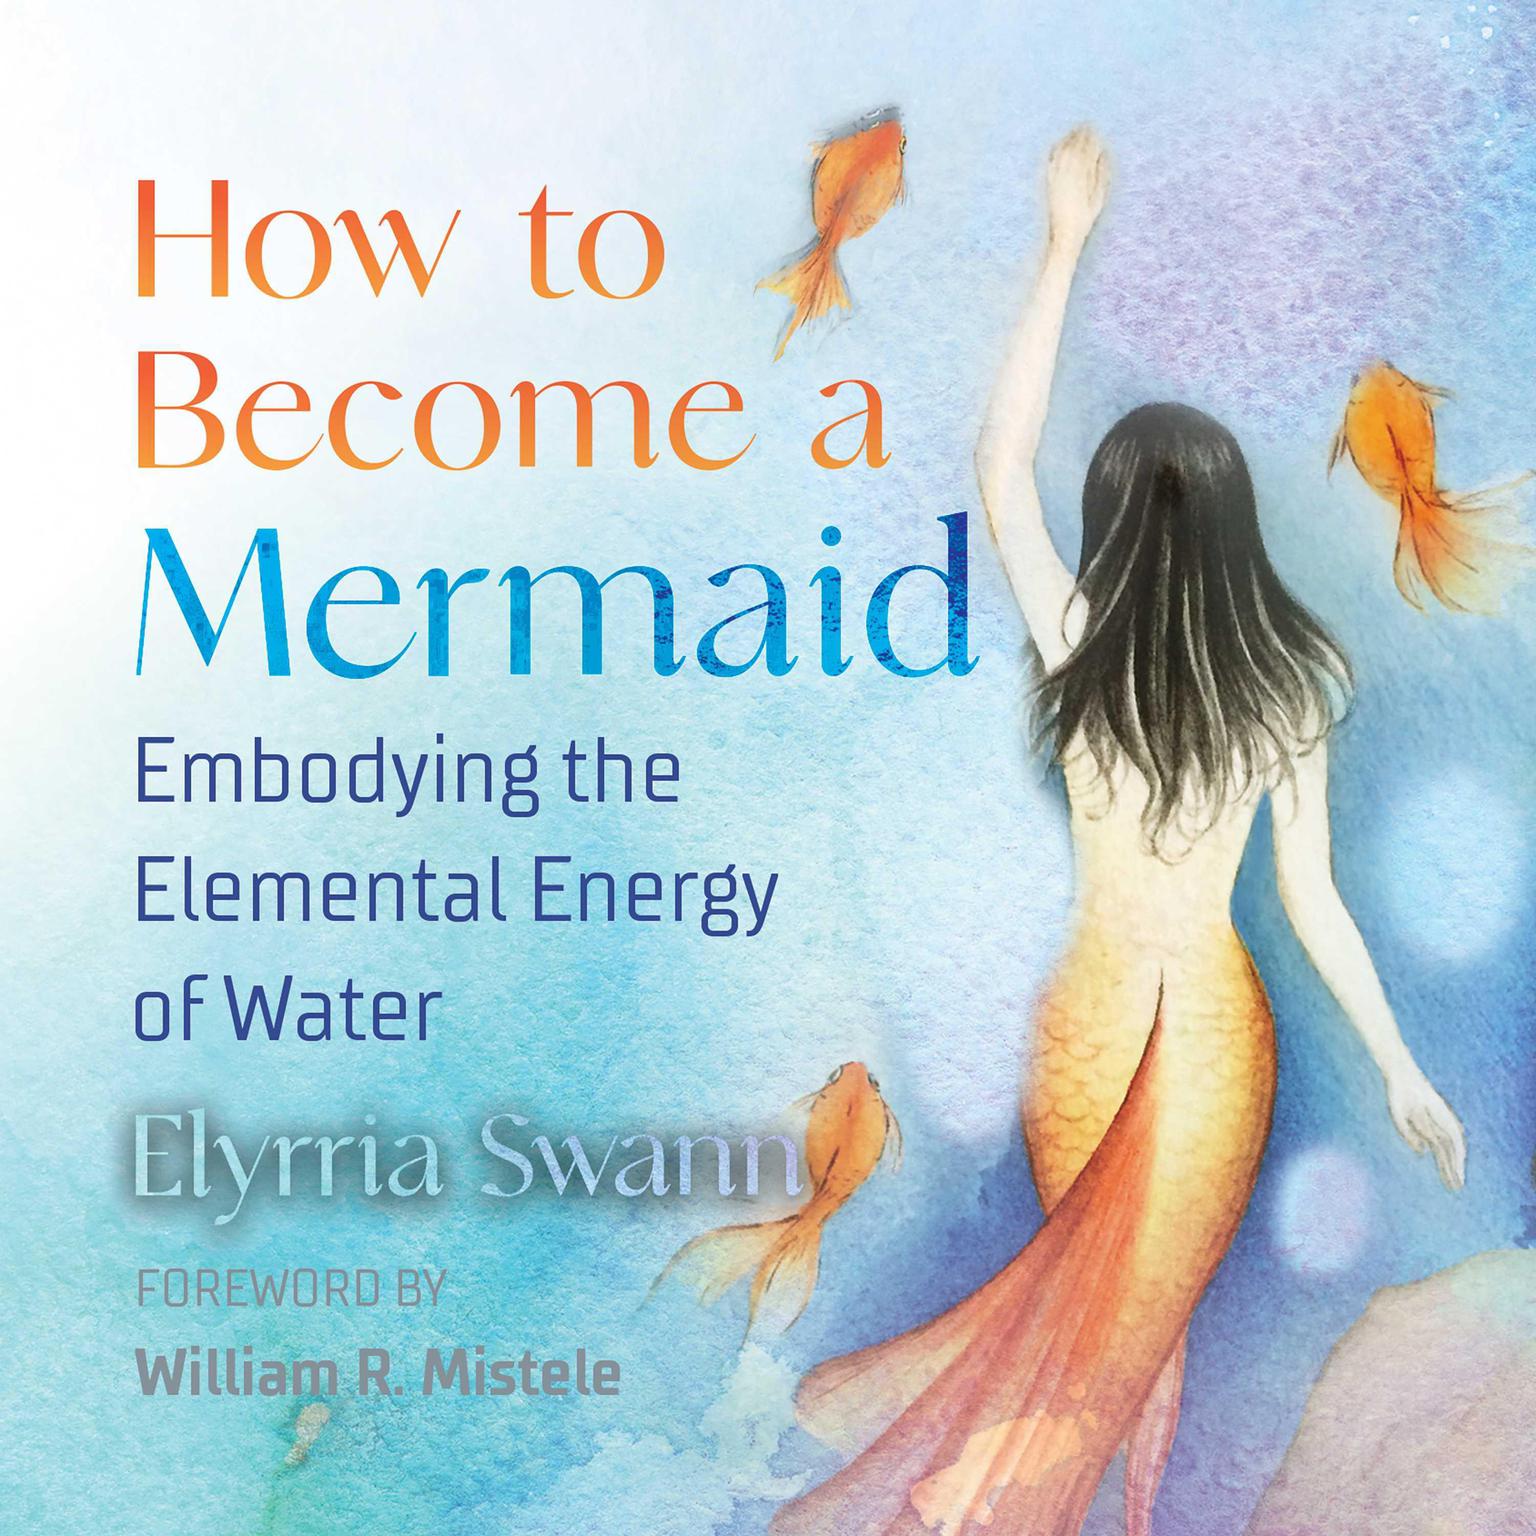 How to Become a Mermaid: Embodying the Elemental Energy of Water Audiobook, by Elyrria Swann